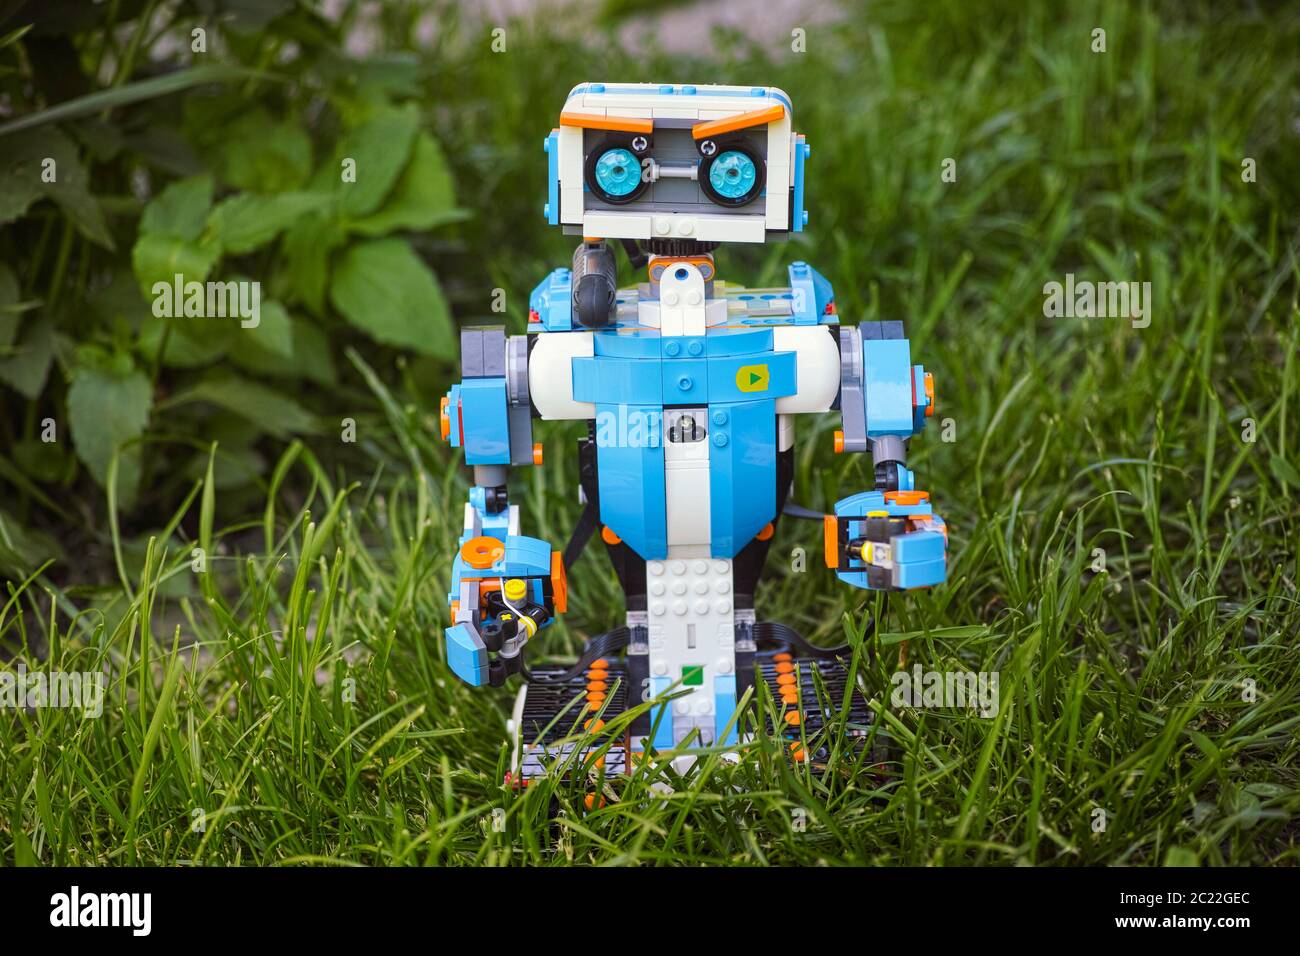 Tambov, Russian Federation - June 16, 2020 Lego Boost Vernie the Robot standing outside on grass. Stock Photo